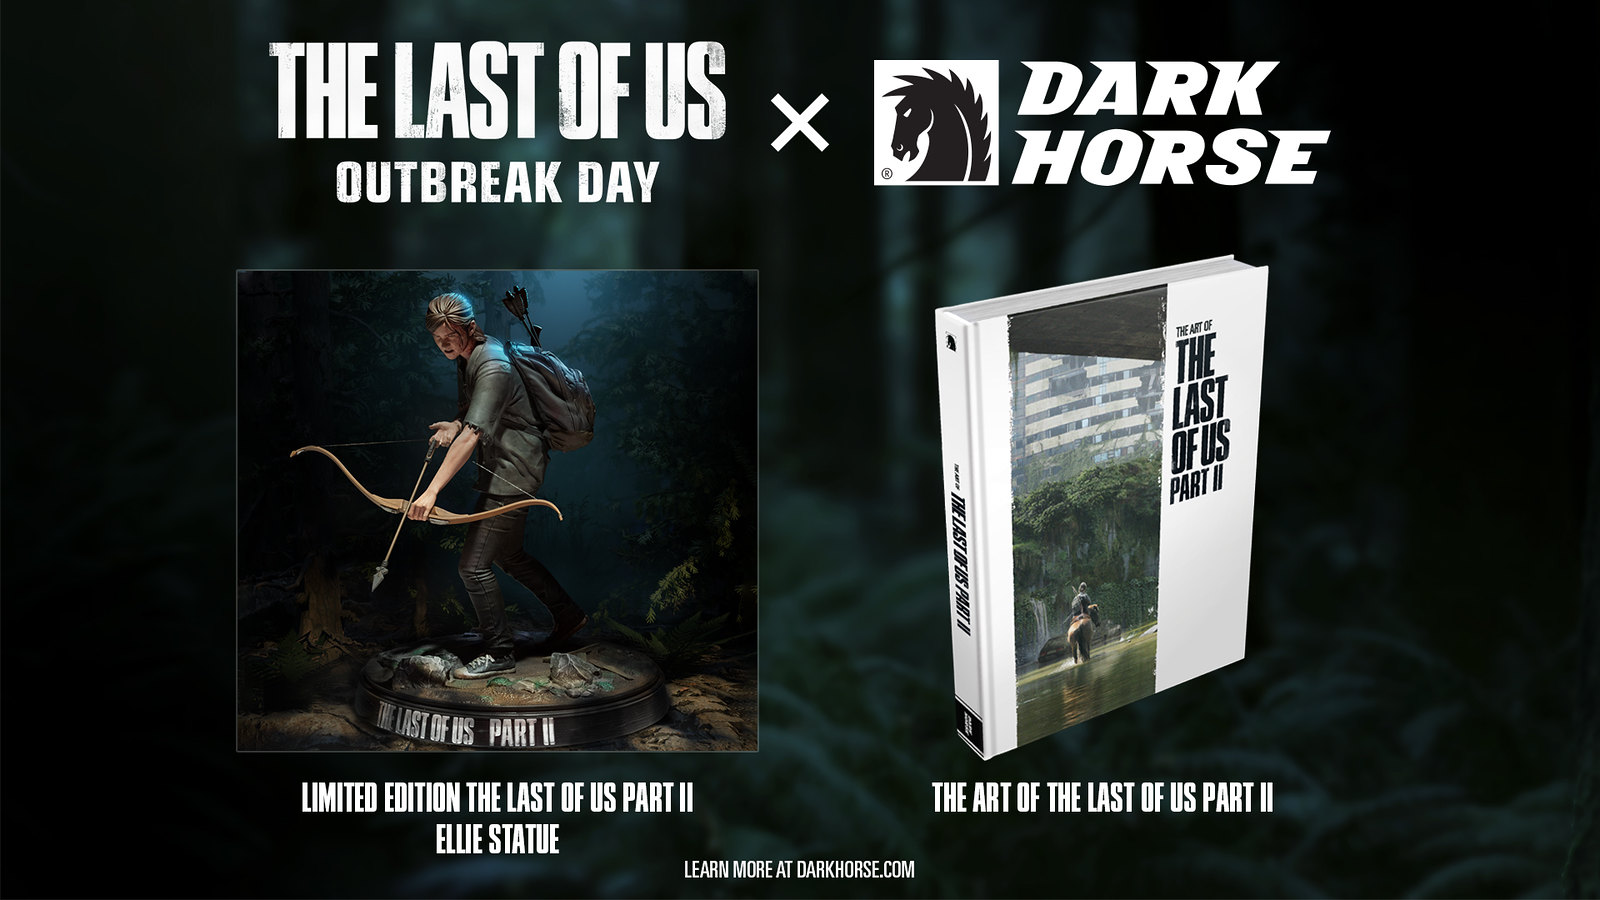 The Last of Us Part II - Outbreak Day